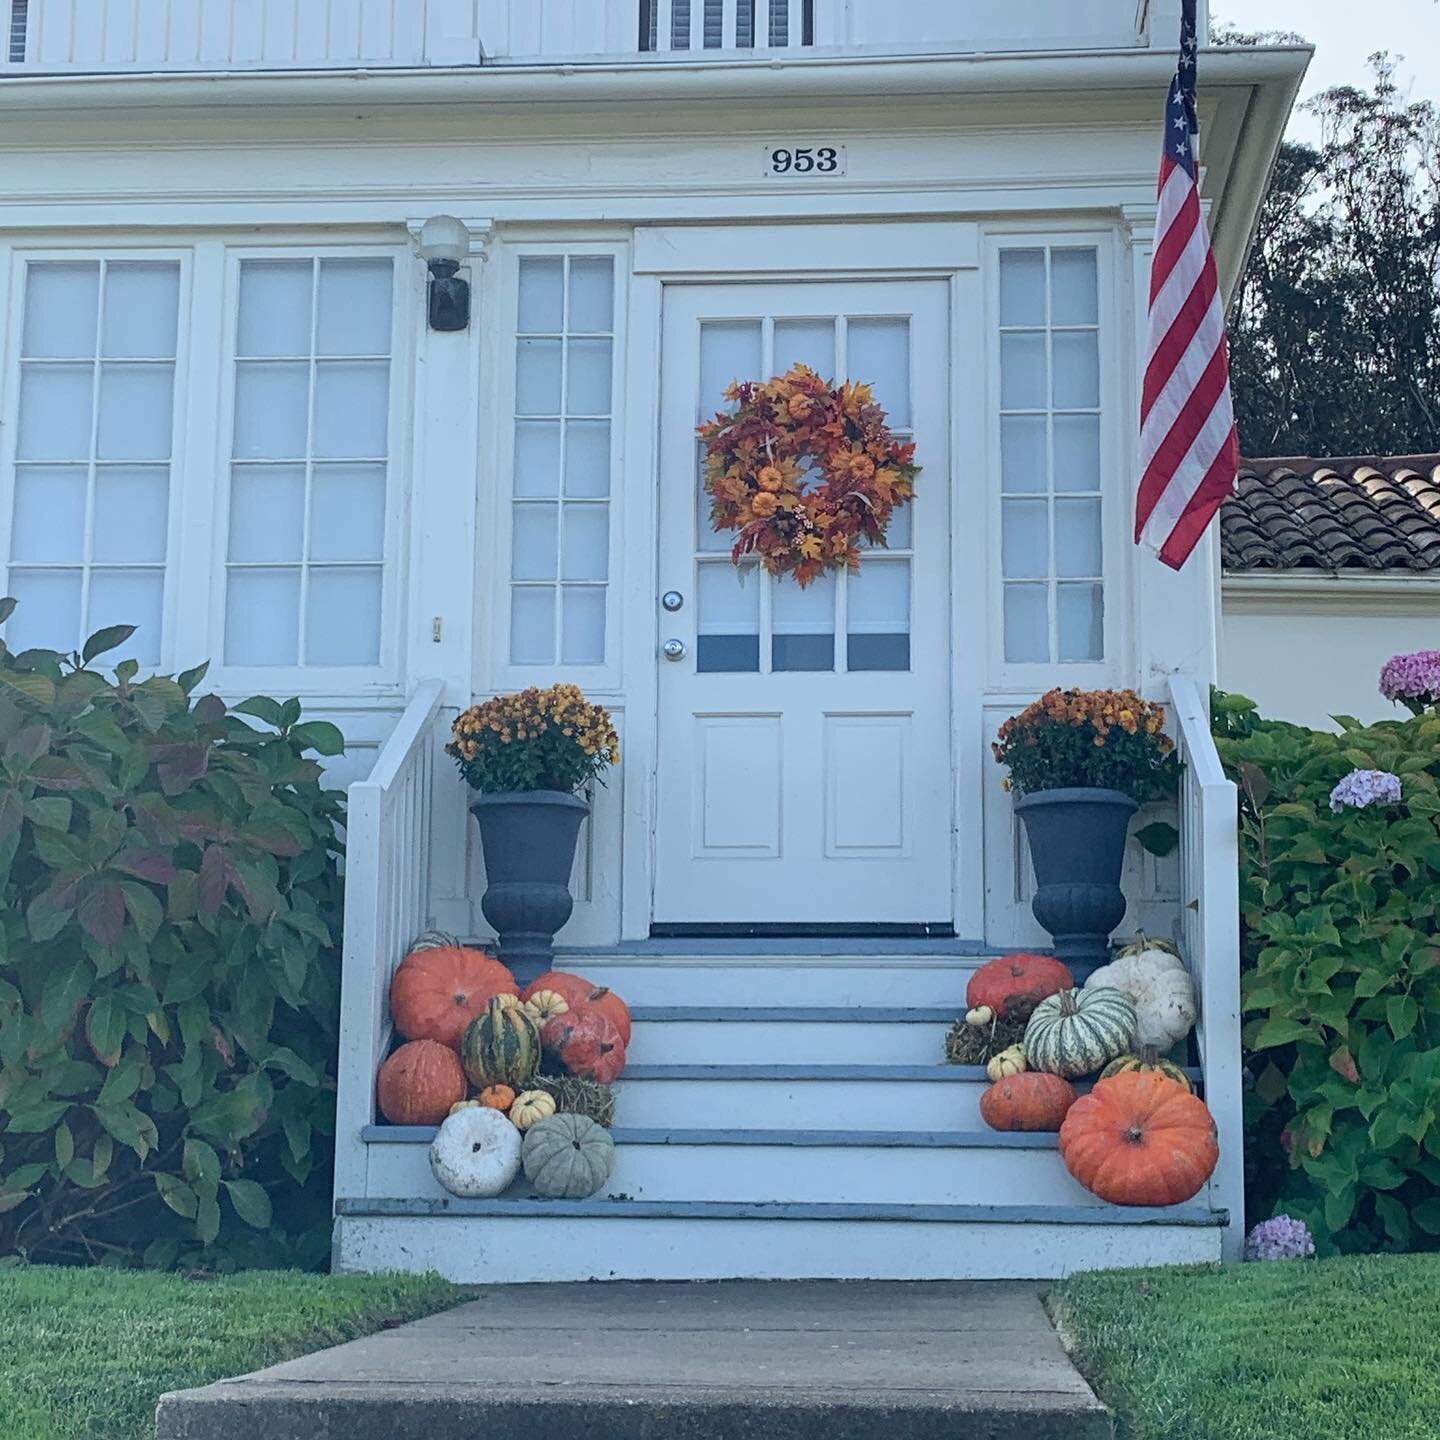 Welcoming entrance on my walk in the Presidio. Hello Thanksgiving week!